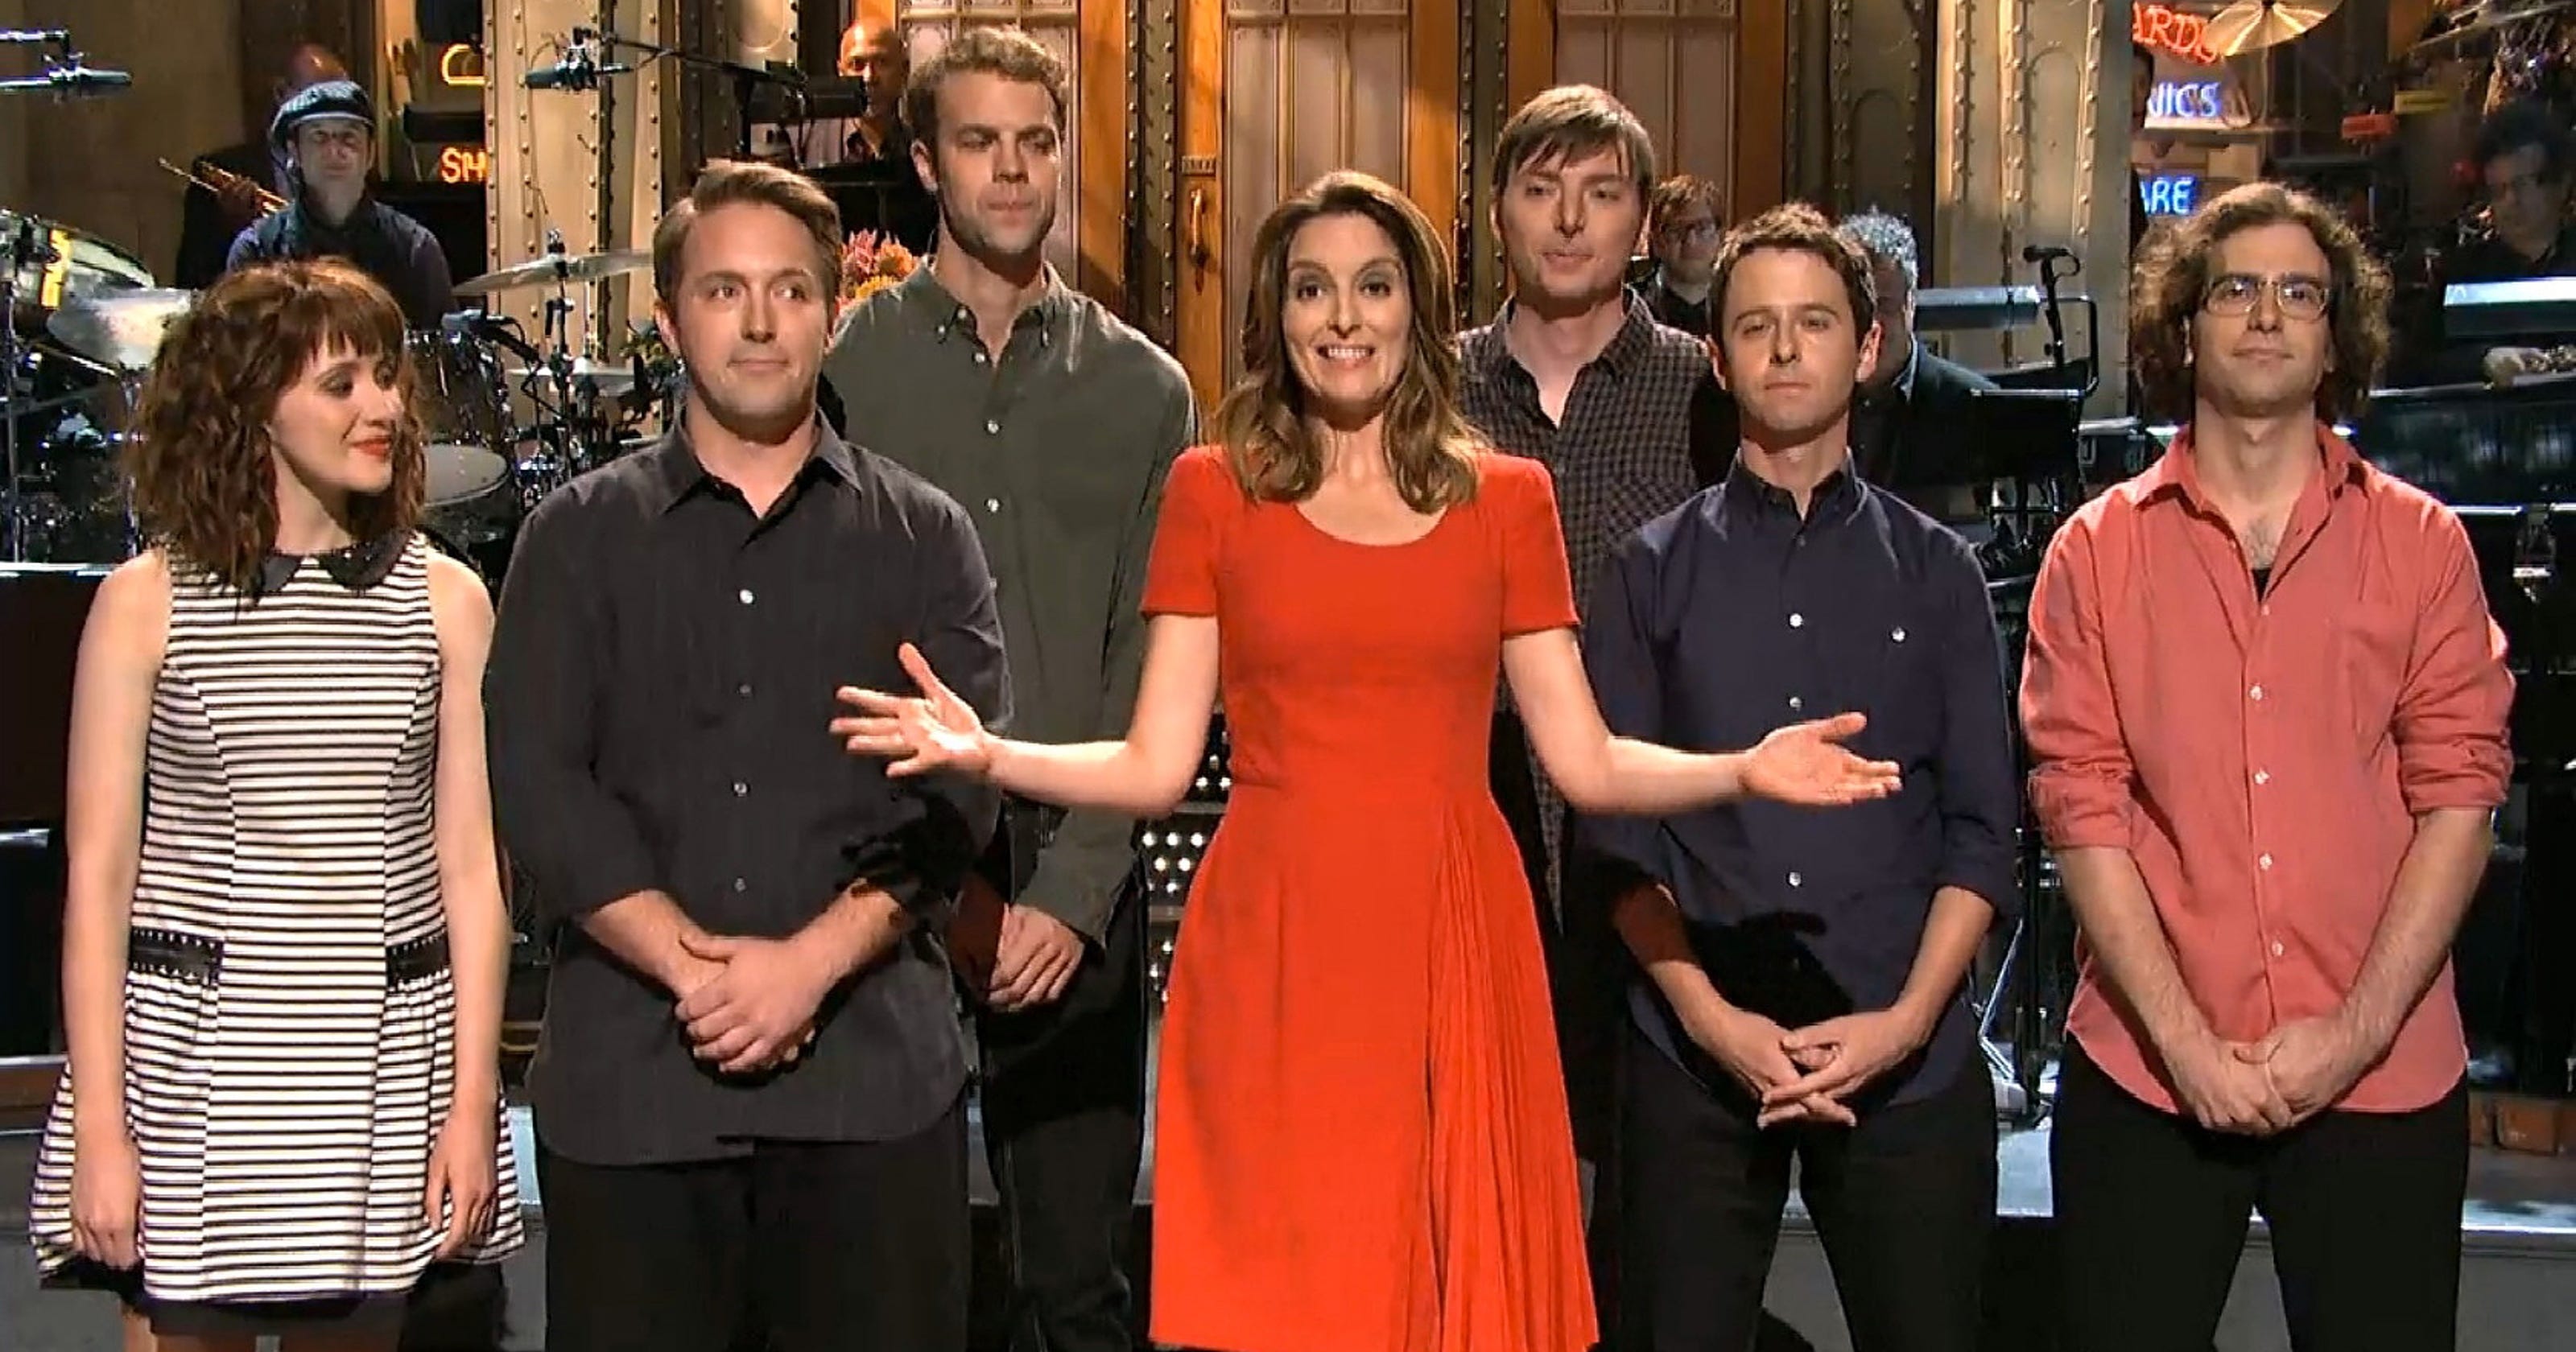 Snl Cast 20 of SNL's Most Successful Cast Members 22 Words Many